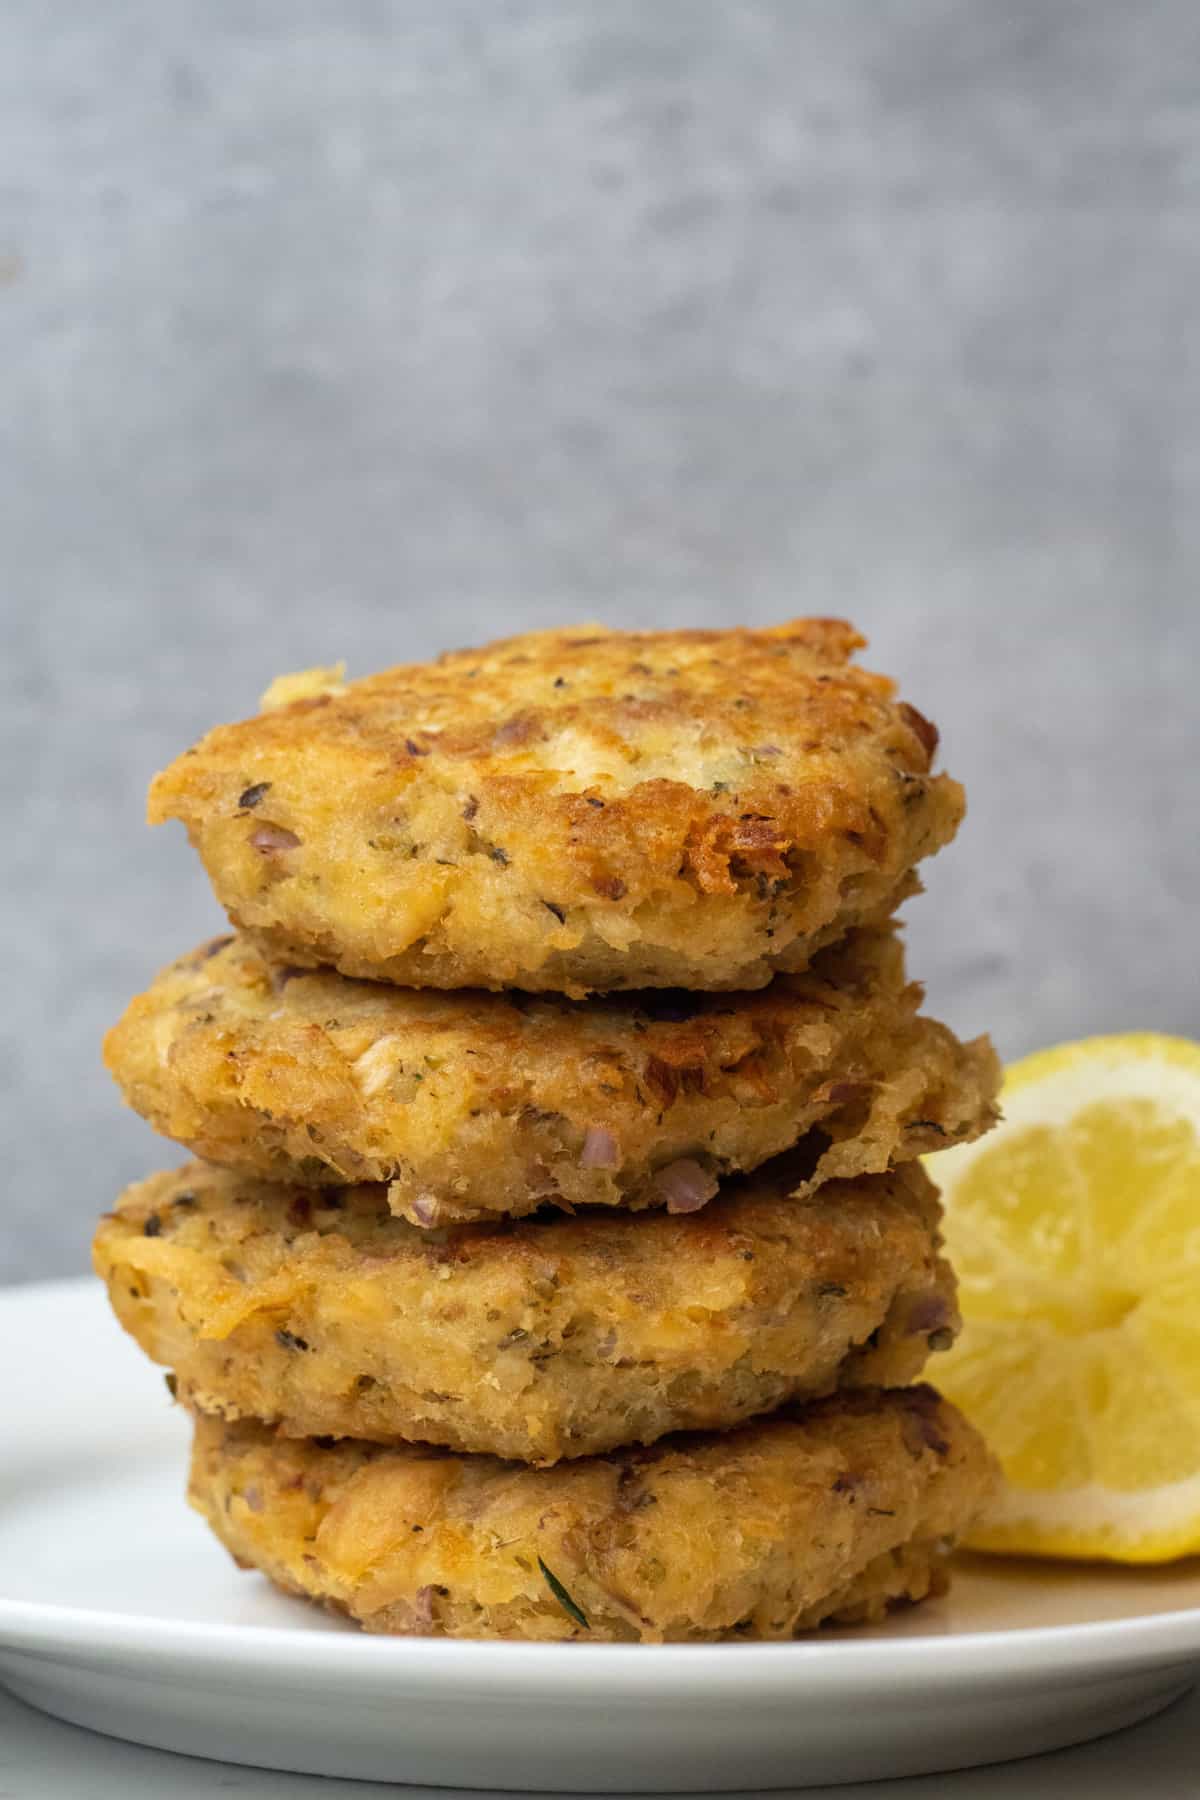 These Tuna Patties Recipe are made with tuna from a can, onion, chives, mayonnaise, crumbs, oregano, vinegar and baked to perfection. 